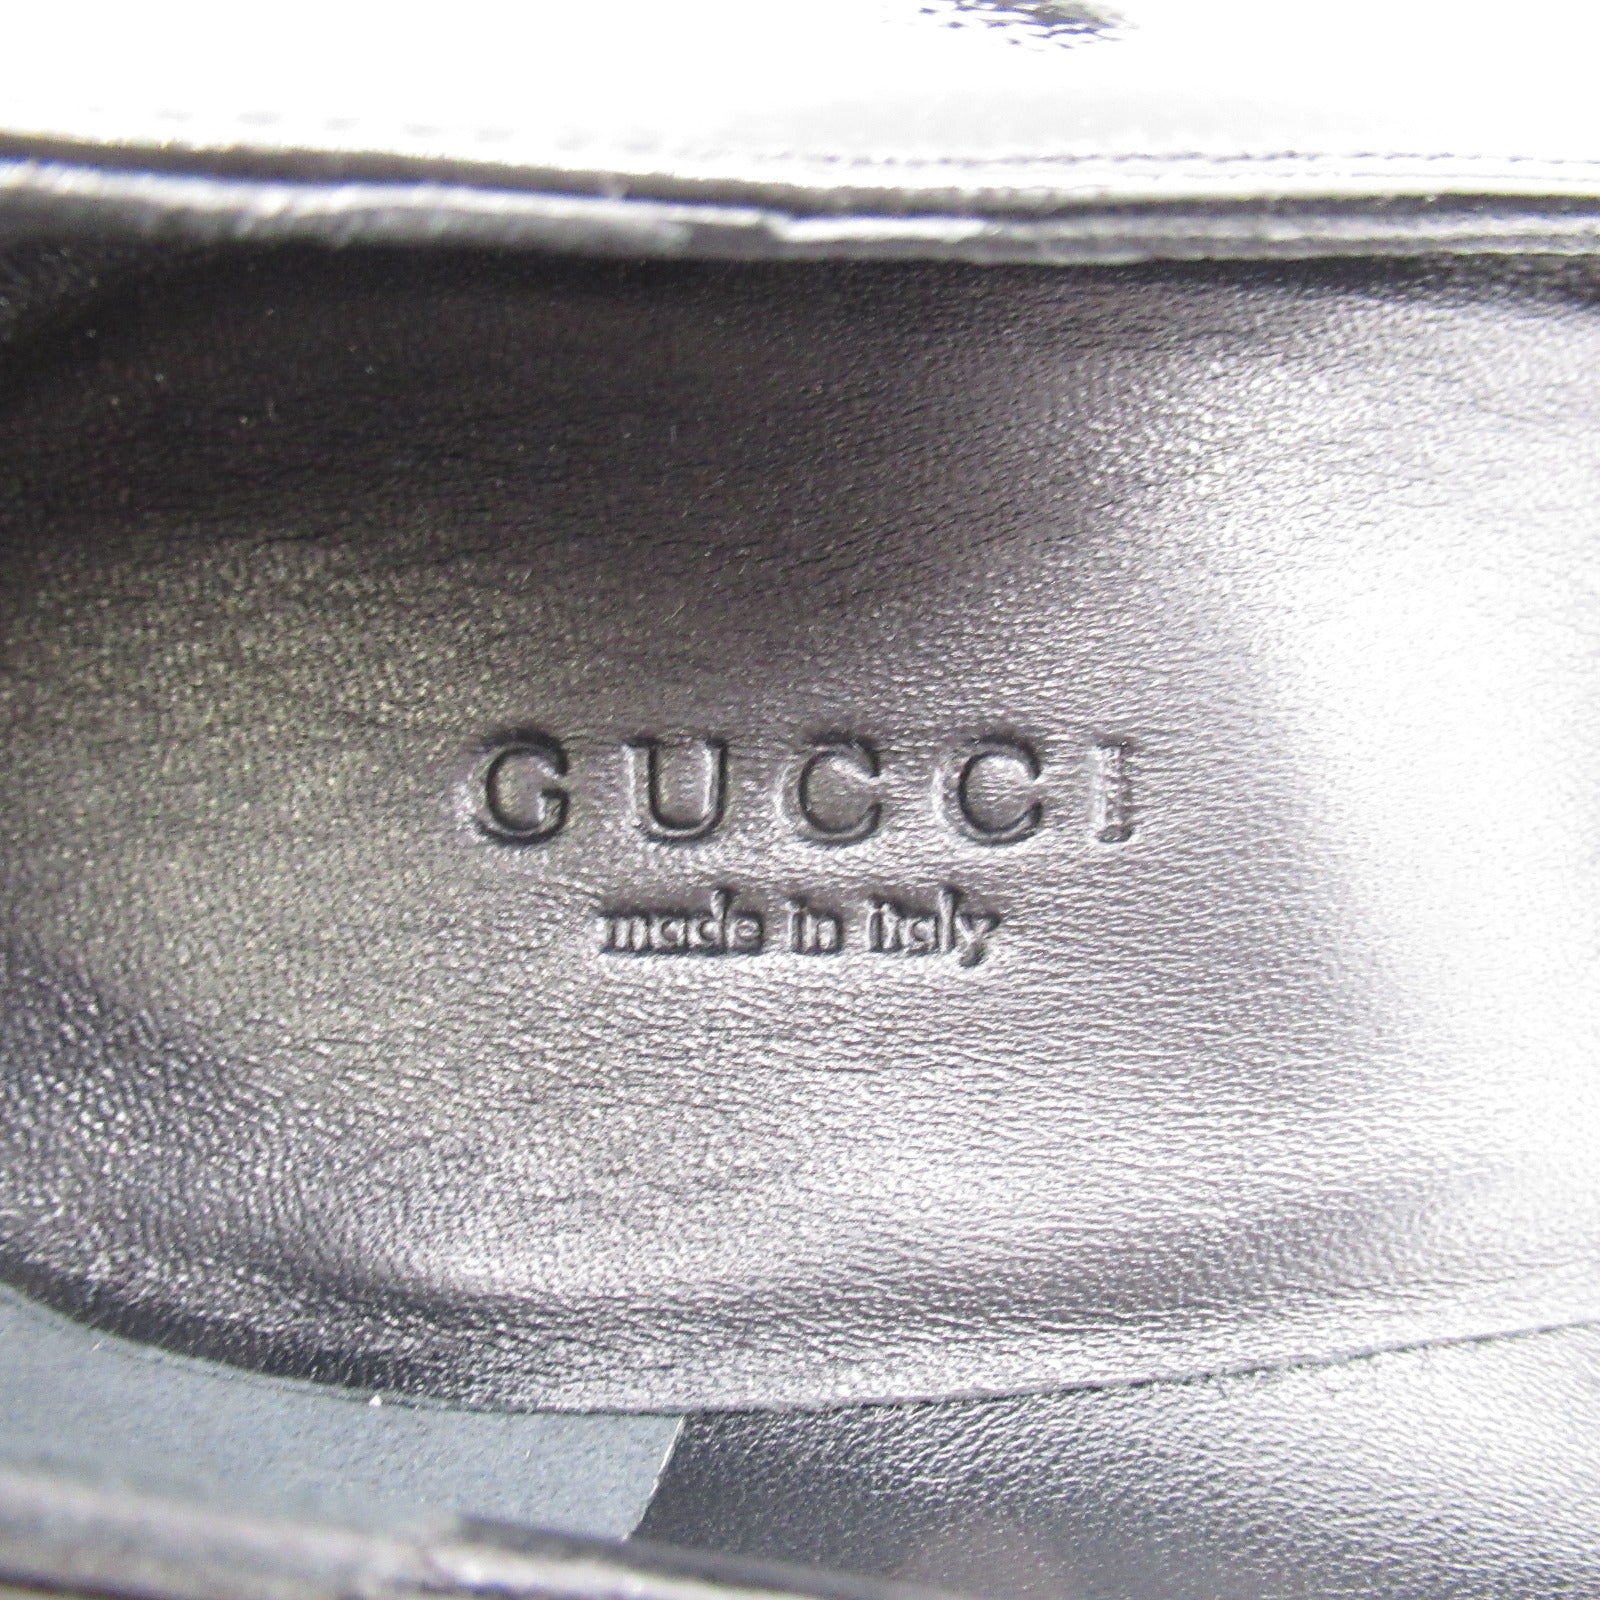 Gucci Gucci Wedding Hair Pump Shoes Patent Leather  Black